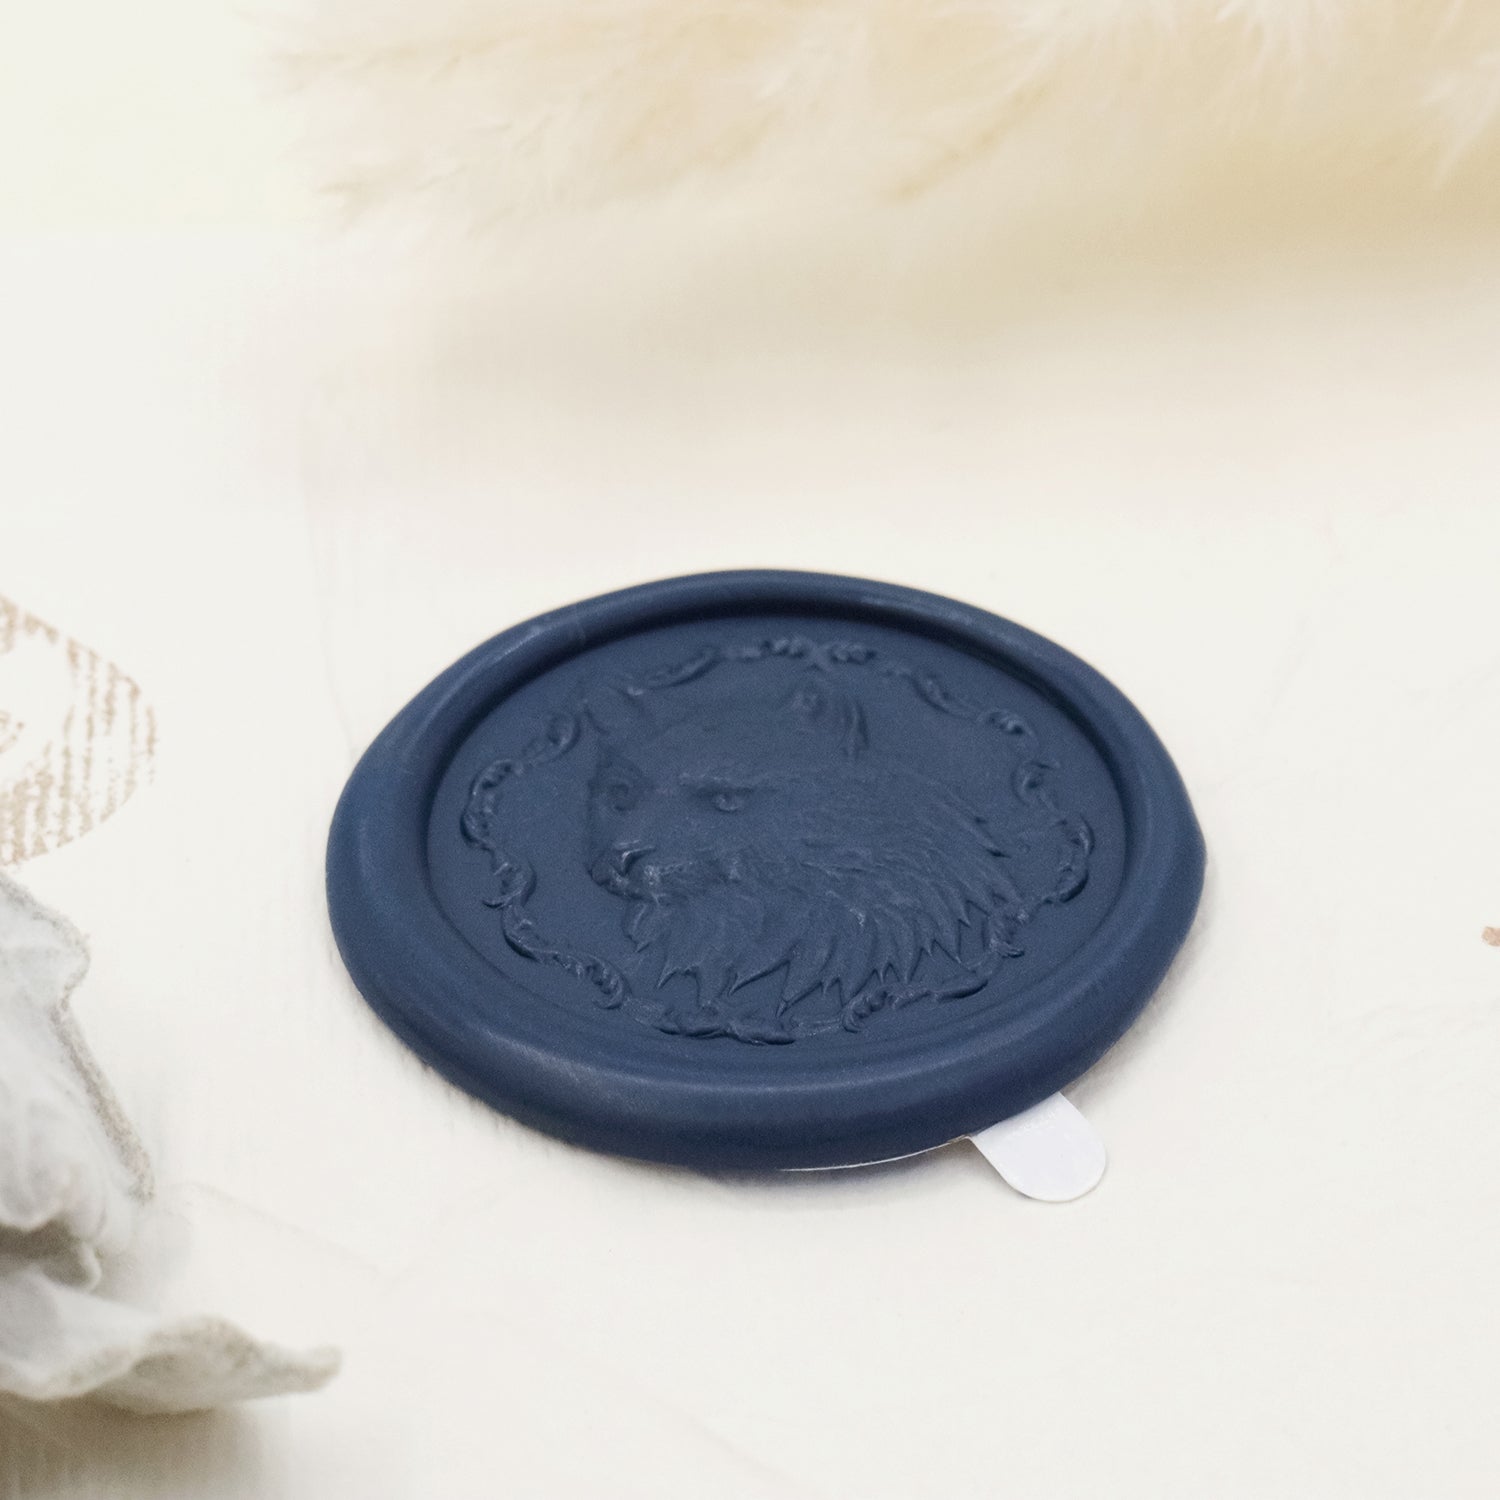 Stamprints 3D Relief Kitty Self-adhesive Wax Seal Stickers 4